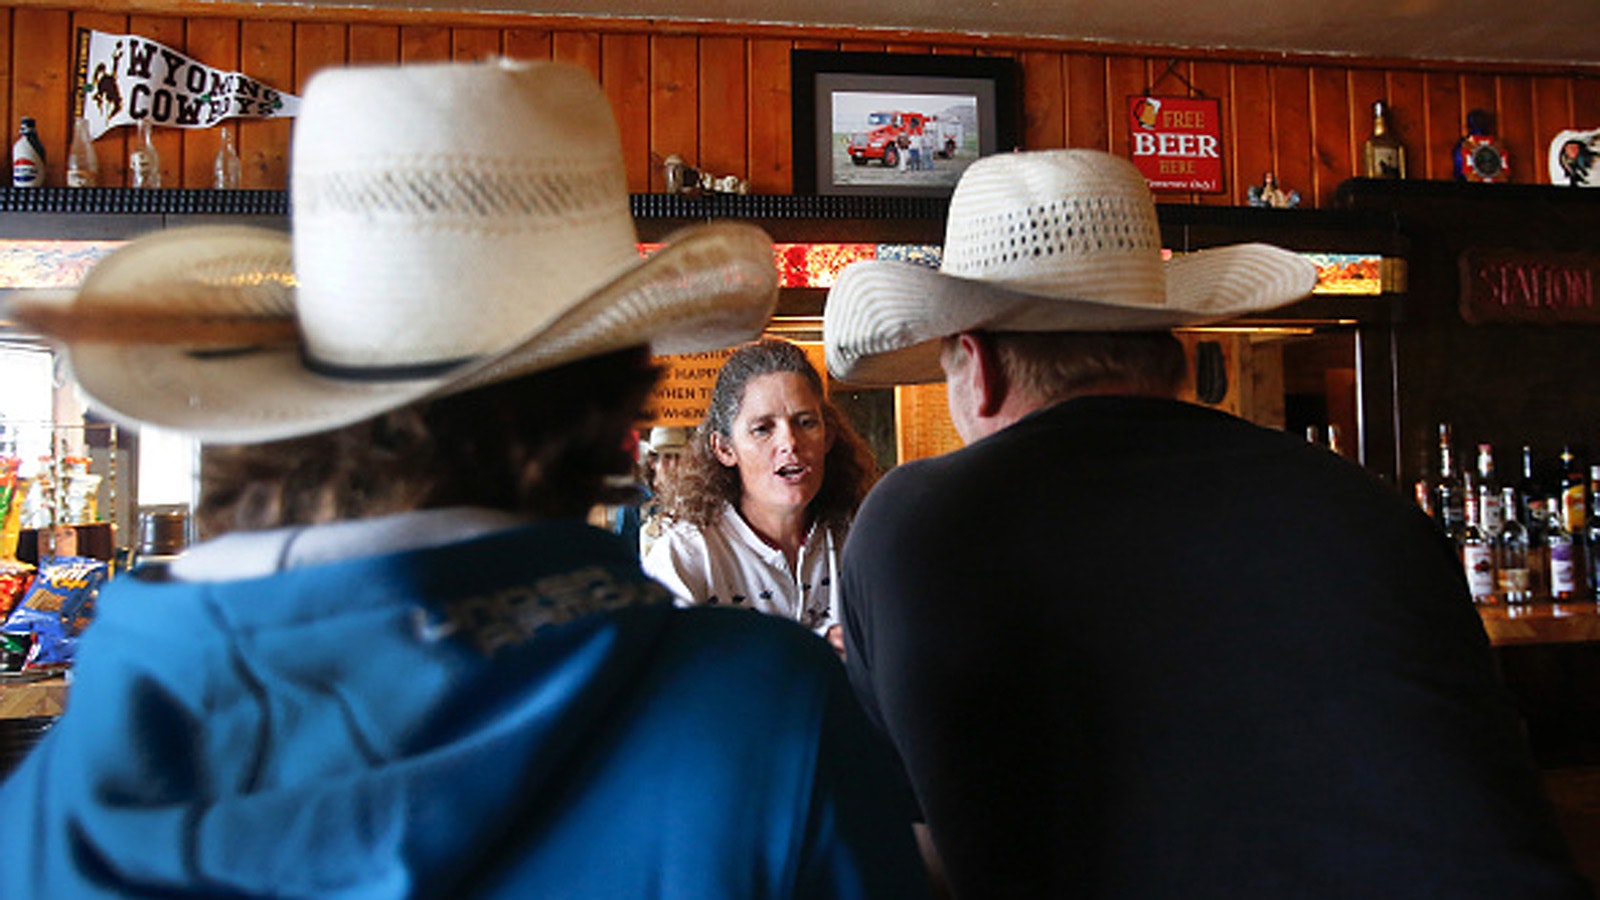 The Split Rock Bar in Jeffrey City reports no change in sales of Bud Light. That's because "nobody cares," said owner Isebel Hyatt.